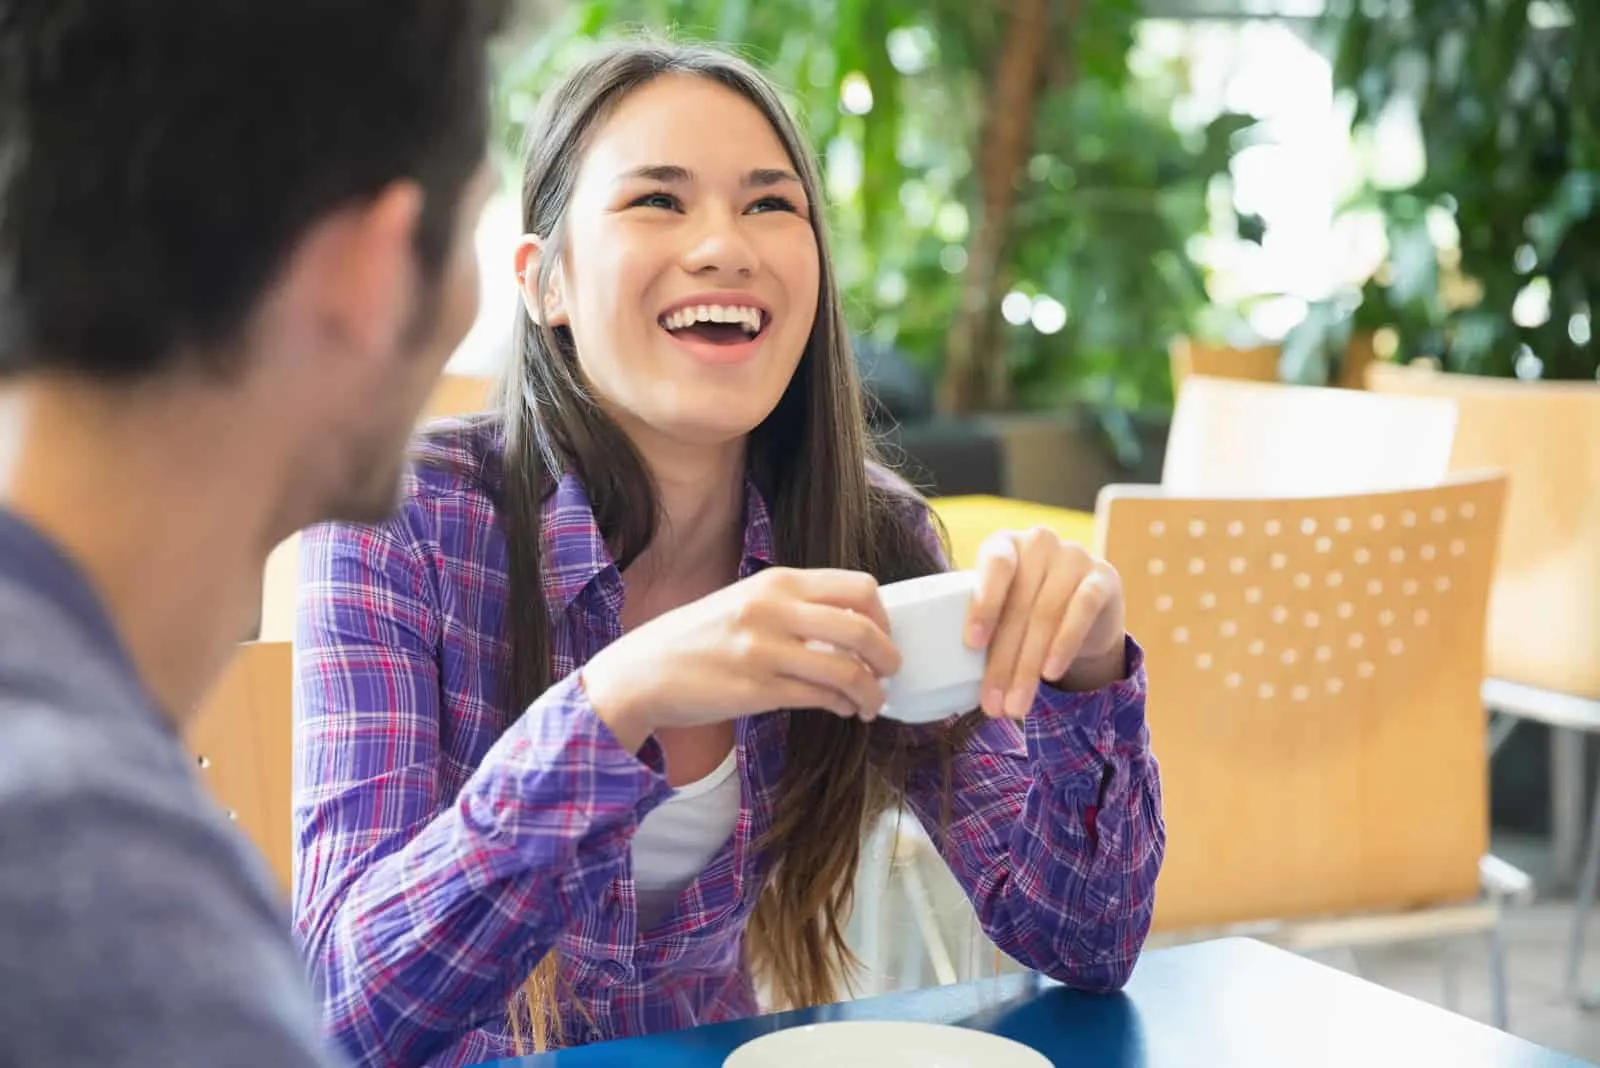 a smiling woman talking to a man while drinking coffee